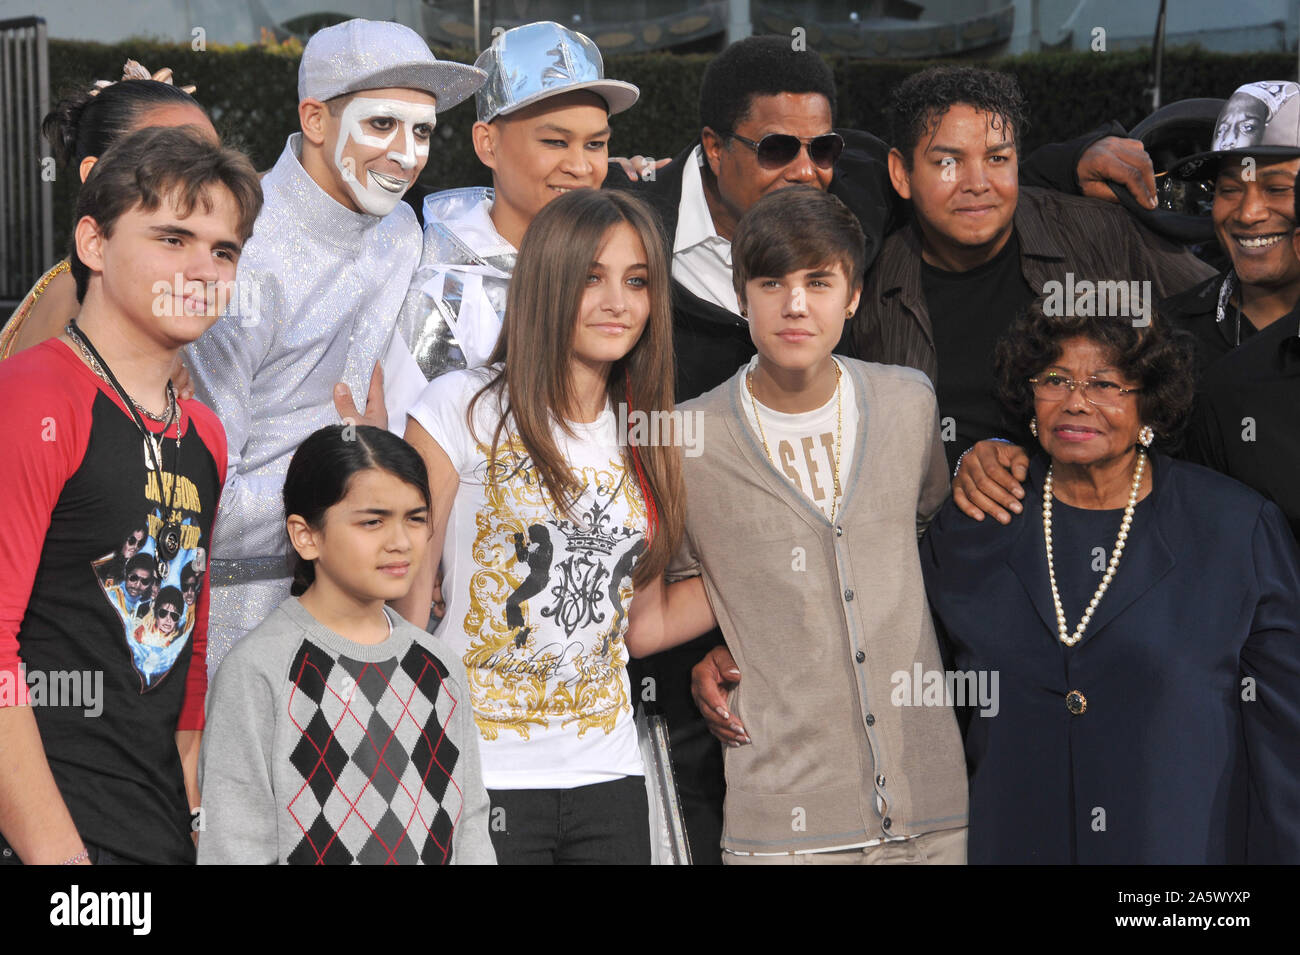 LOS ANGELES, CA. January 26, 2012: Michael Jackson's children Prince Michael, Paris & Prince Michael II 'Blanket' with their grandmother Katherine Jackson & singer Justin Bieber on Hollywood Boulevard where they placed their father's hand & footprints, using his shoes & glove, in cement in the courtyard of the Grauman's Chinese Theatre. Cirque du Soleil's new show 'Michael Jackson THE IMMORTAL World Tour' premieres in Los Angeles tomorrow. © 2012 Paul Smith / Featureflash Stock Photo